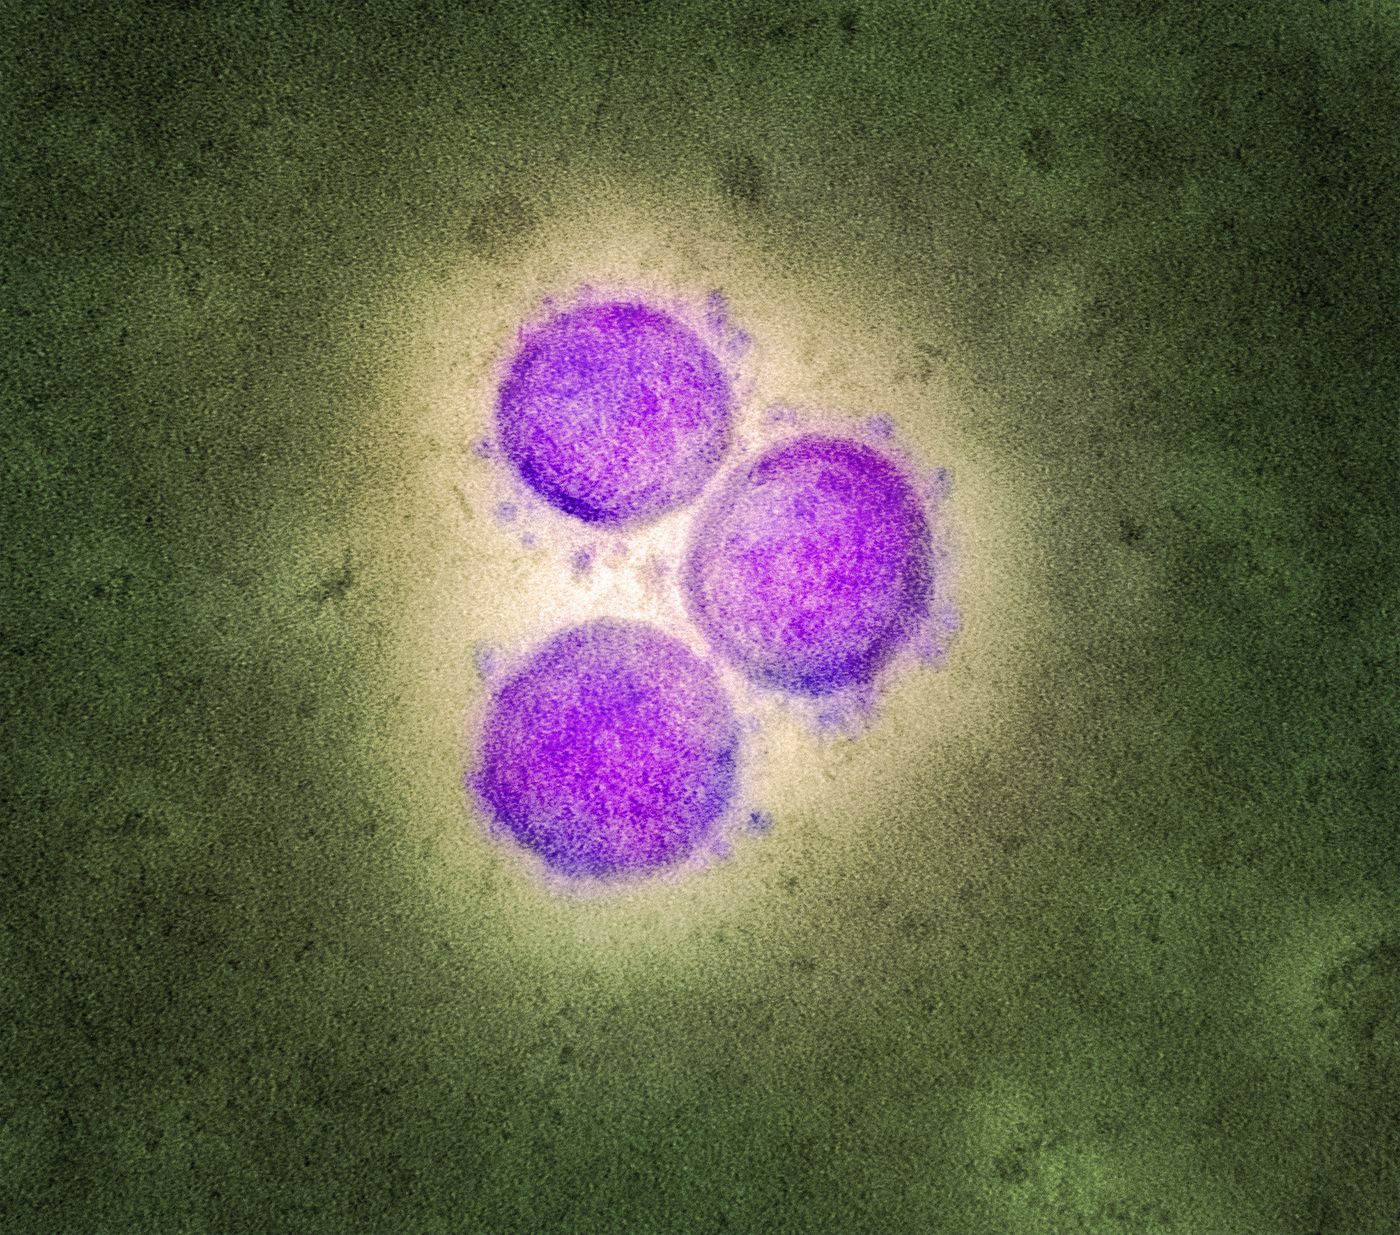 Transmission electron micrograph of SARS-CoV-2 virus particles (UK B.1.1.7 variant), isolated from a patient sample and cultivated in cell culture. Image captured at the NIAID Integrated Research Facility (IRF) in Fort Detrick, Maryland. / Credit: NIAID